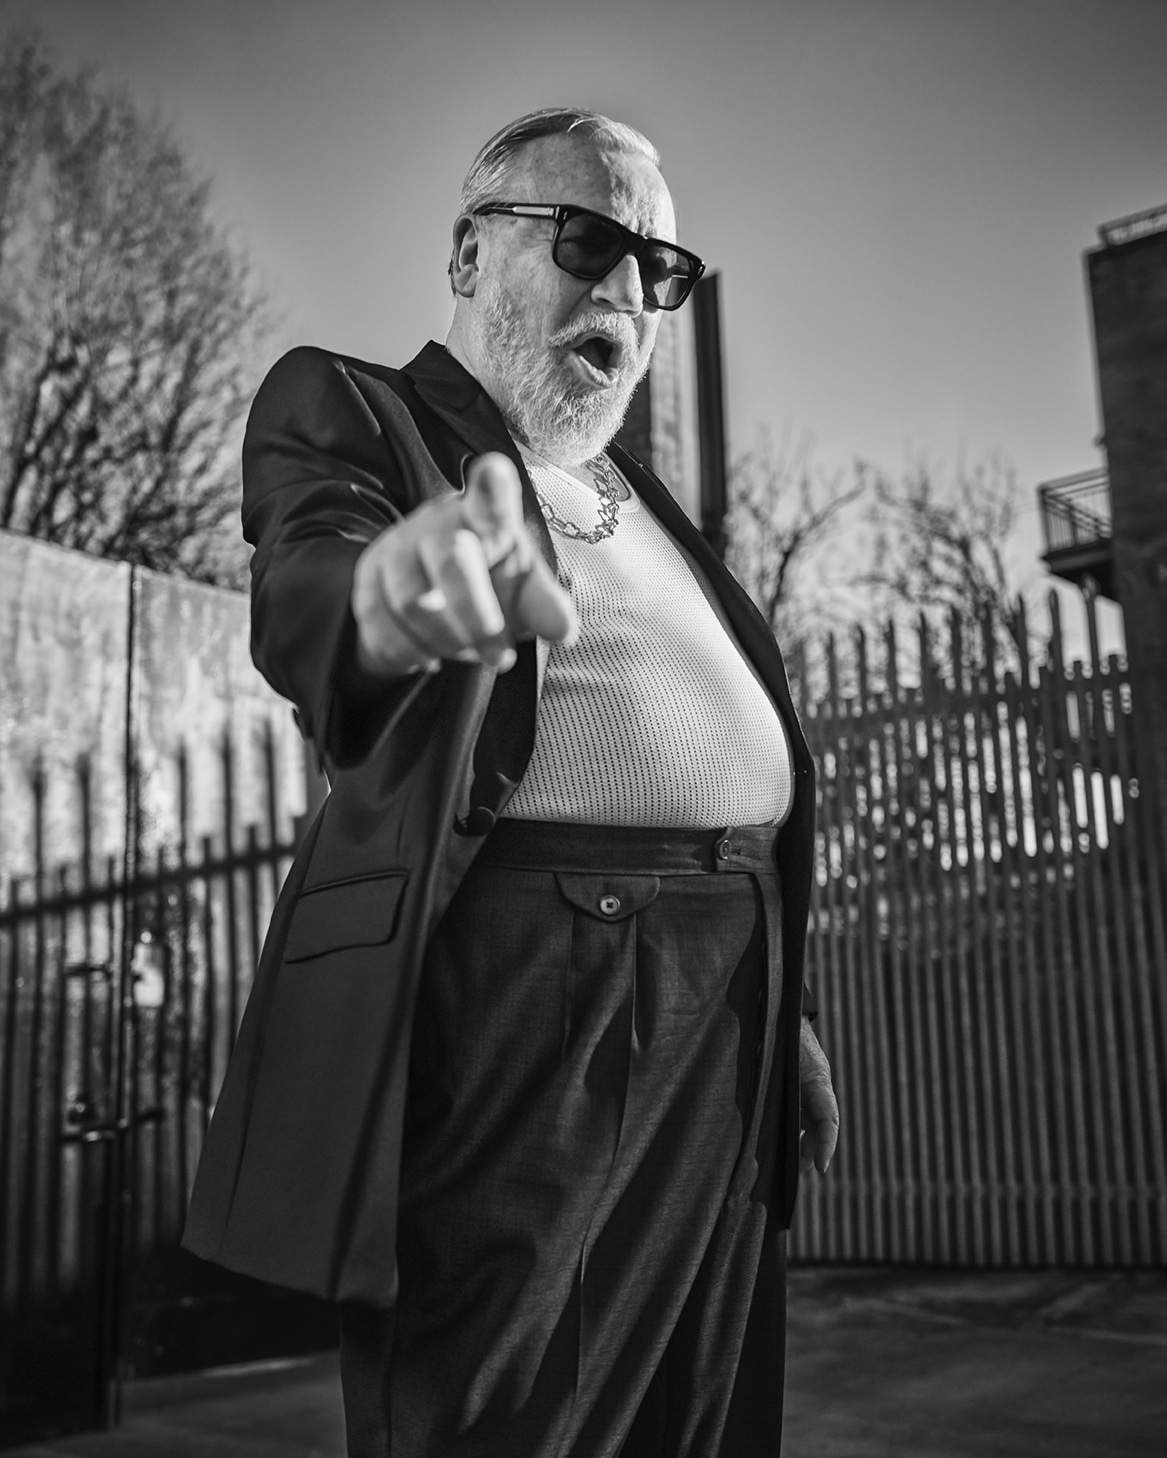 Ray wears Tux by Connoly, Vest by Marks and Spencer, Chain by Goosens, Glasses by Jaques Marie Mage // 📸 : Gavin Bond